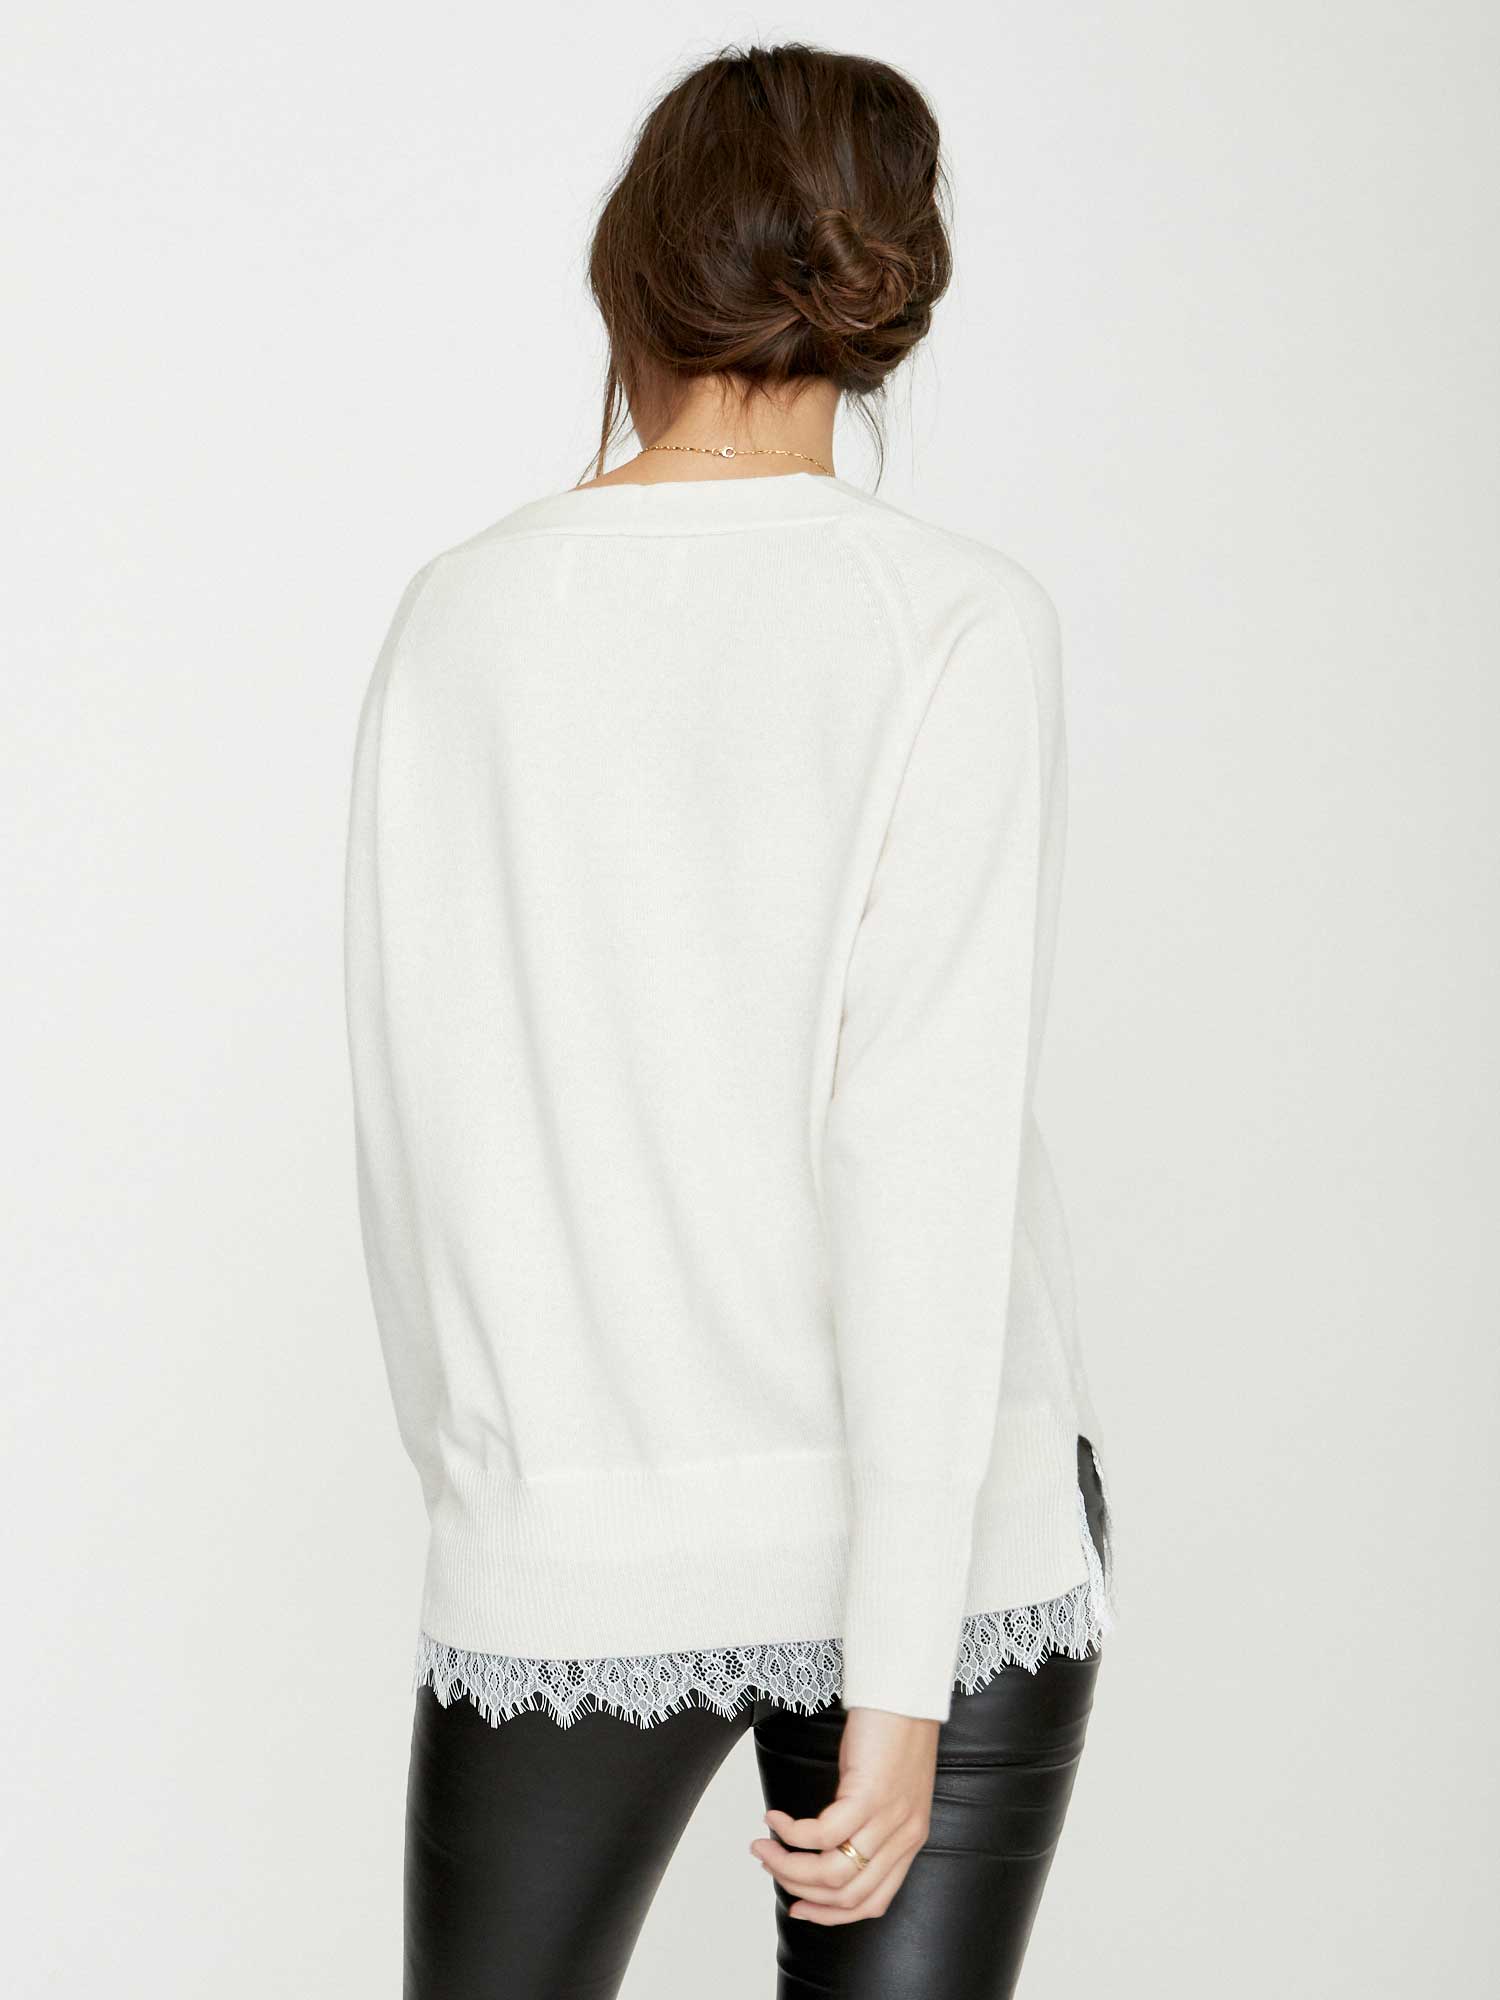 White lace layered v-neck sweater back view